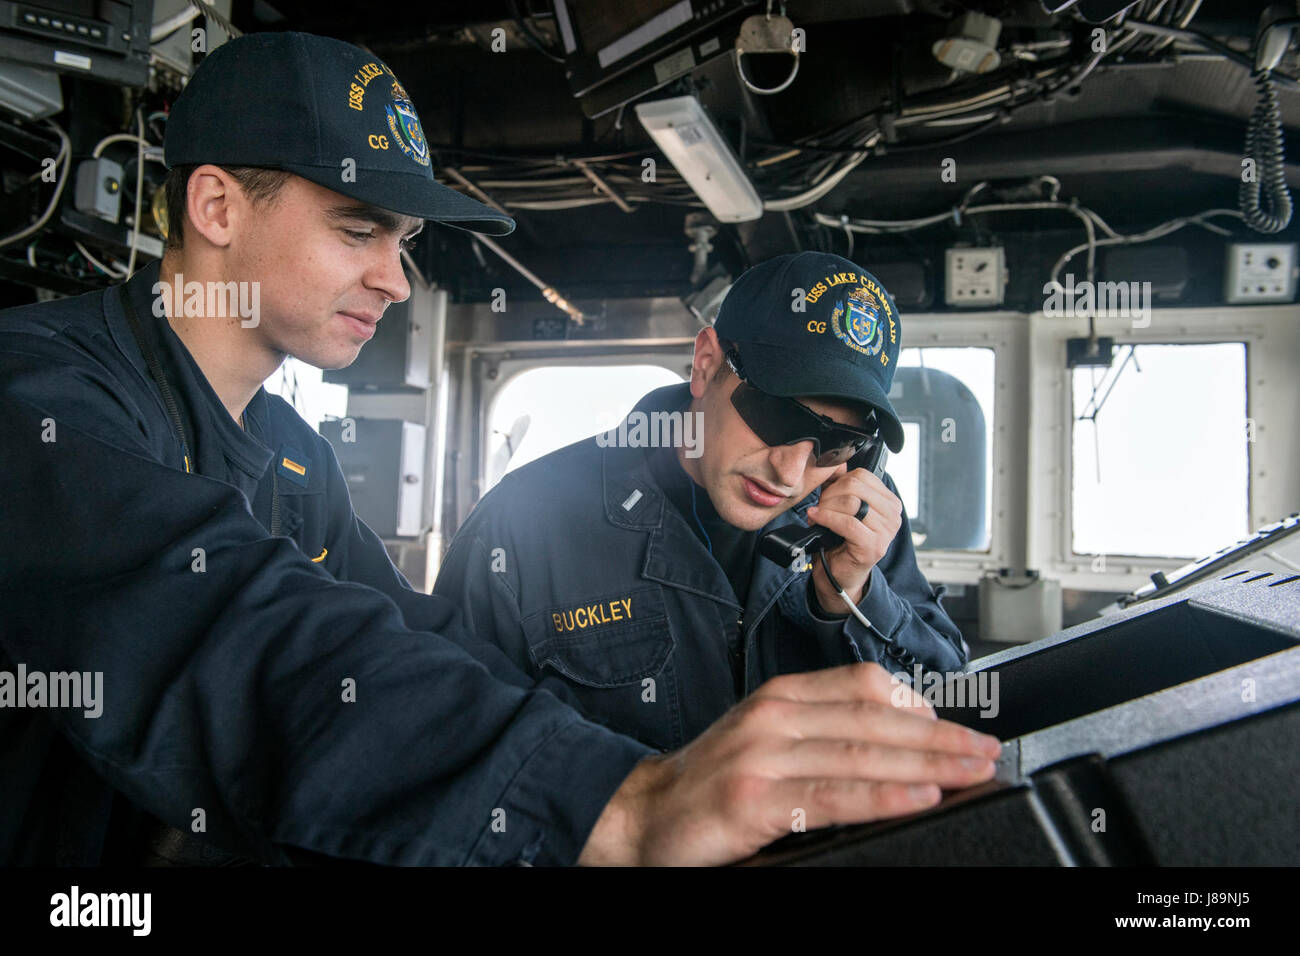 170524-N-FT178-015 WESTERN PACIFIC (May 24, 2017) Ens. John Taiclet, from St. Louis, left and Lt. j.g. Jason Buckley, from Wildwood, Mo., check for clear range before a pre-aim calibration fire exercise aboard Ticonderoga-class guided-missile cruiser USS Lake Champlain (CG 57). The U.S. Navy has patrolled the Indo-Asia-Pacific routinely for more than 70 years promoting regional peace and security. (U.S. Navy photo by Mass Communication Specialist 2nd Class Nathan K. Serpico/Released) Stock Photo